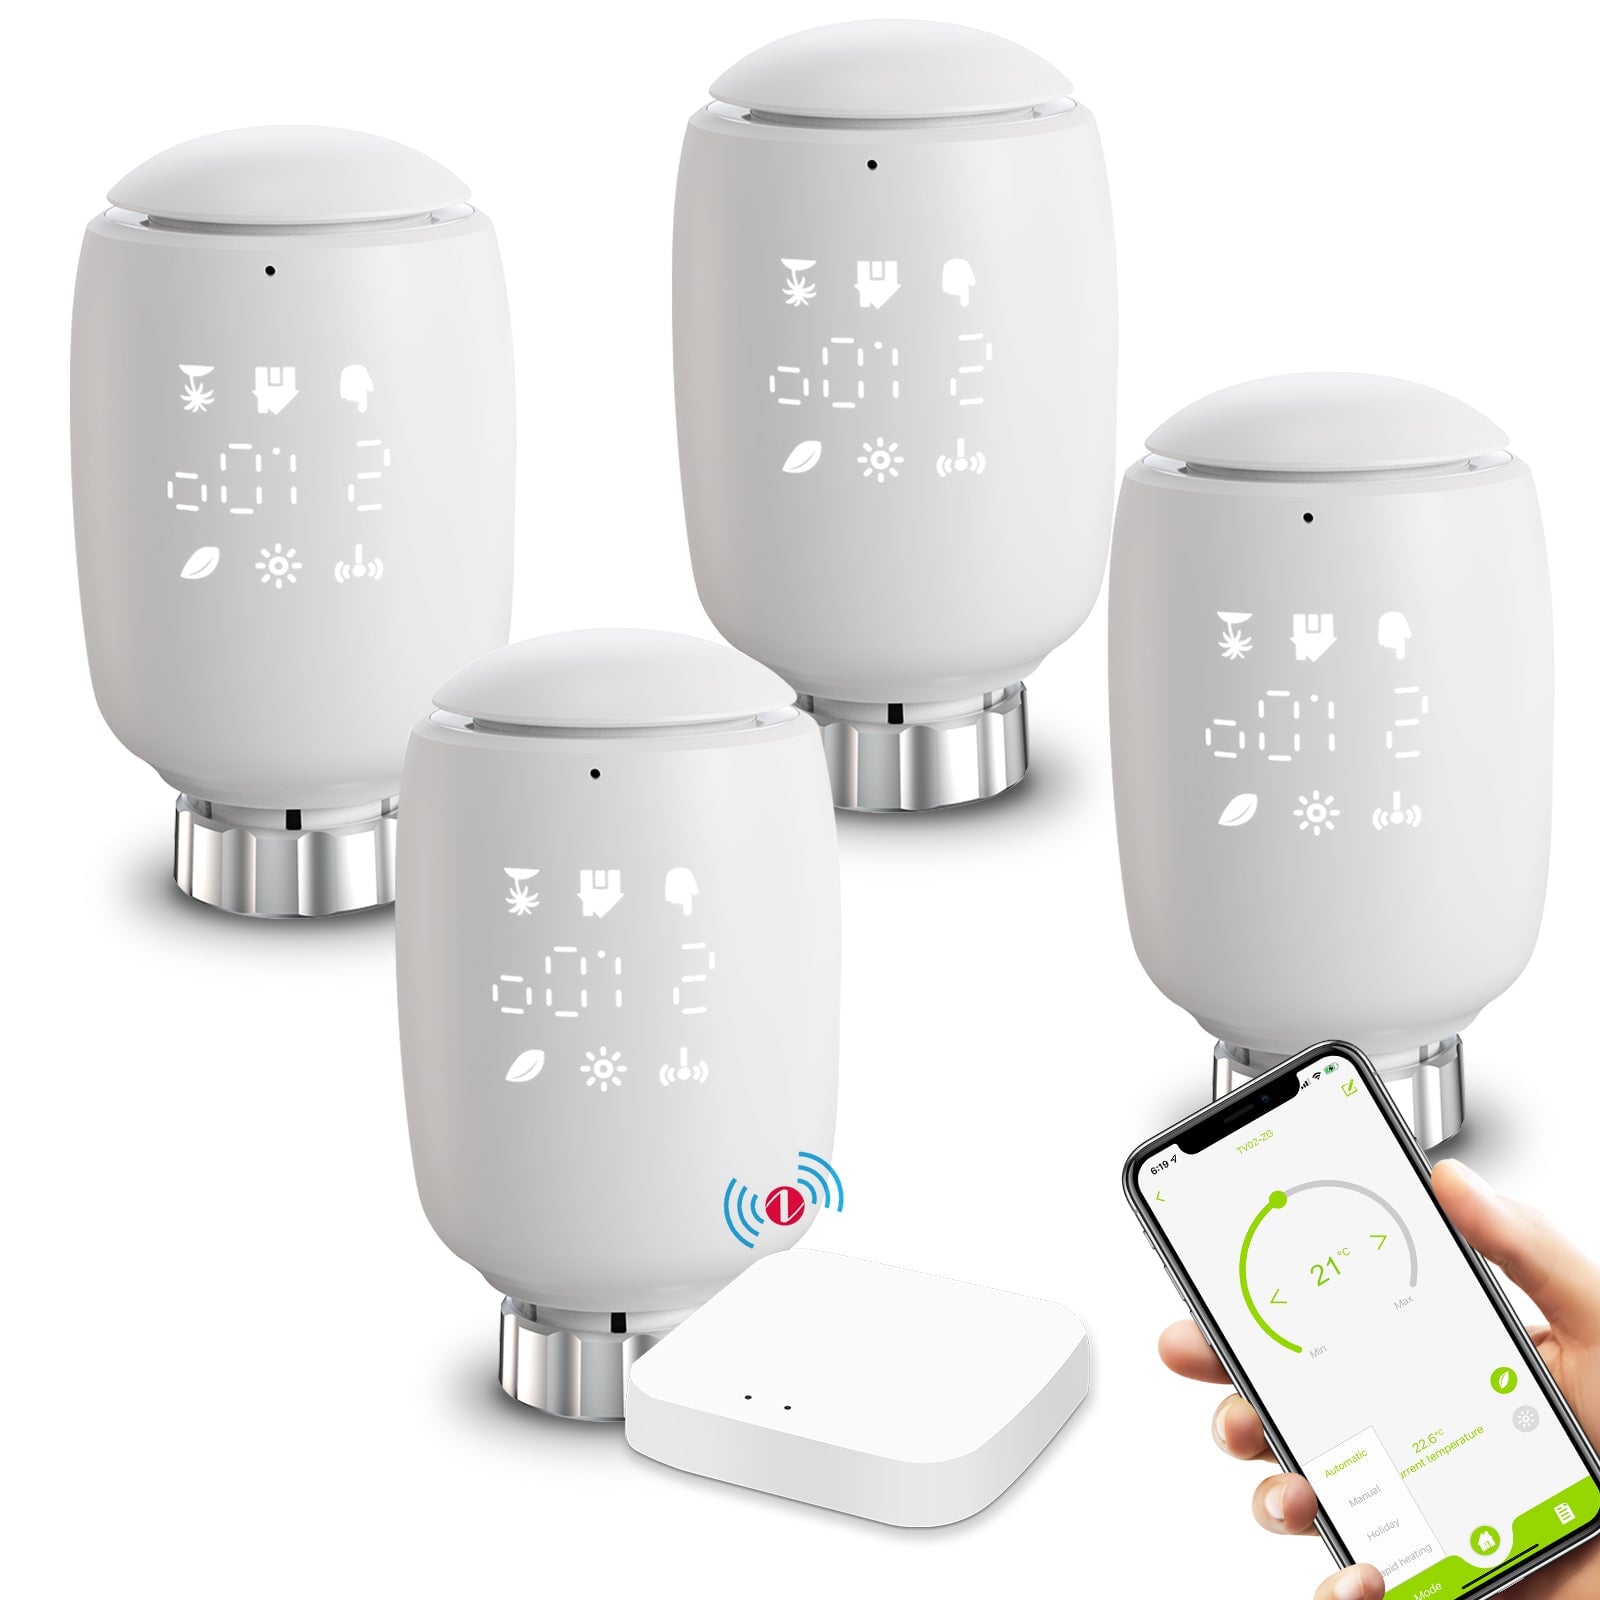 BSEED Zigbee Temperature Controller Intelligent Radiator Compatible Thermostats Bseedswitch 4 Pcs/Pack Thermostat +zigbee gateway hub 